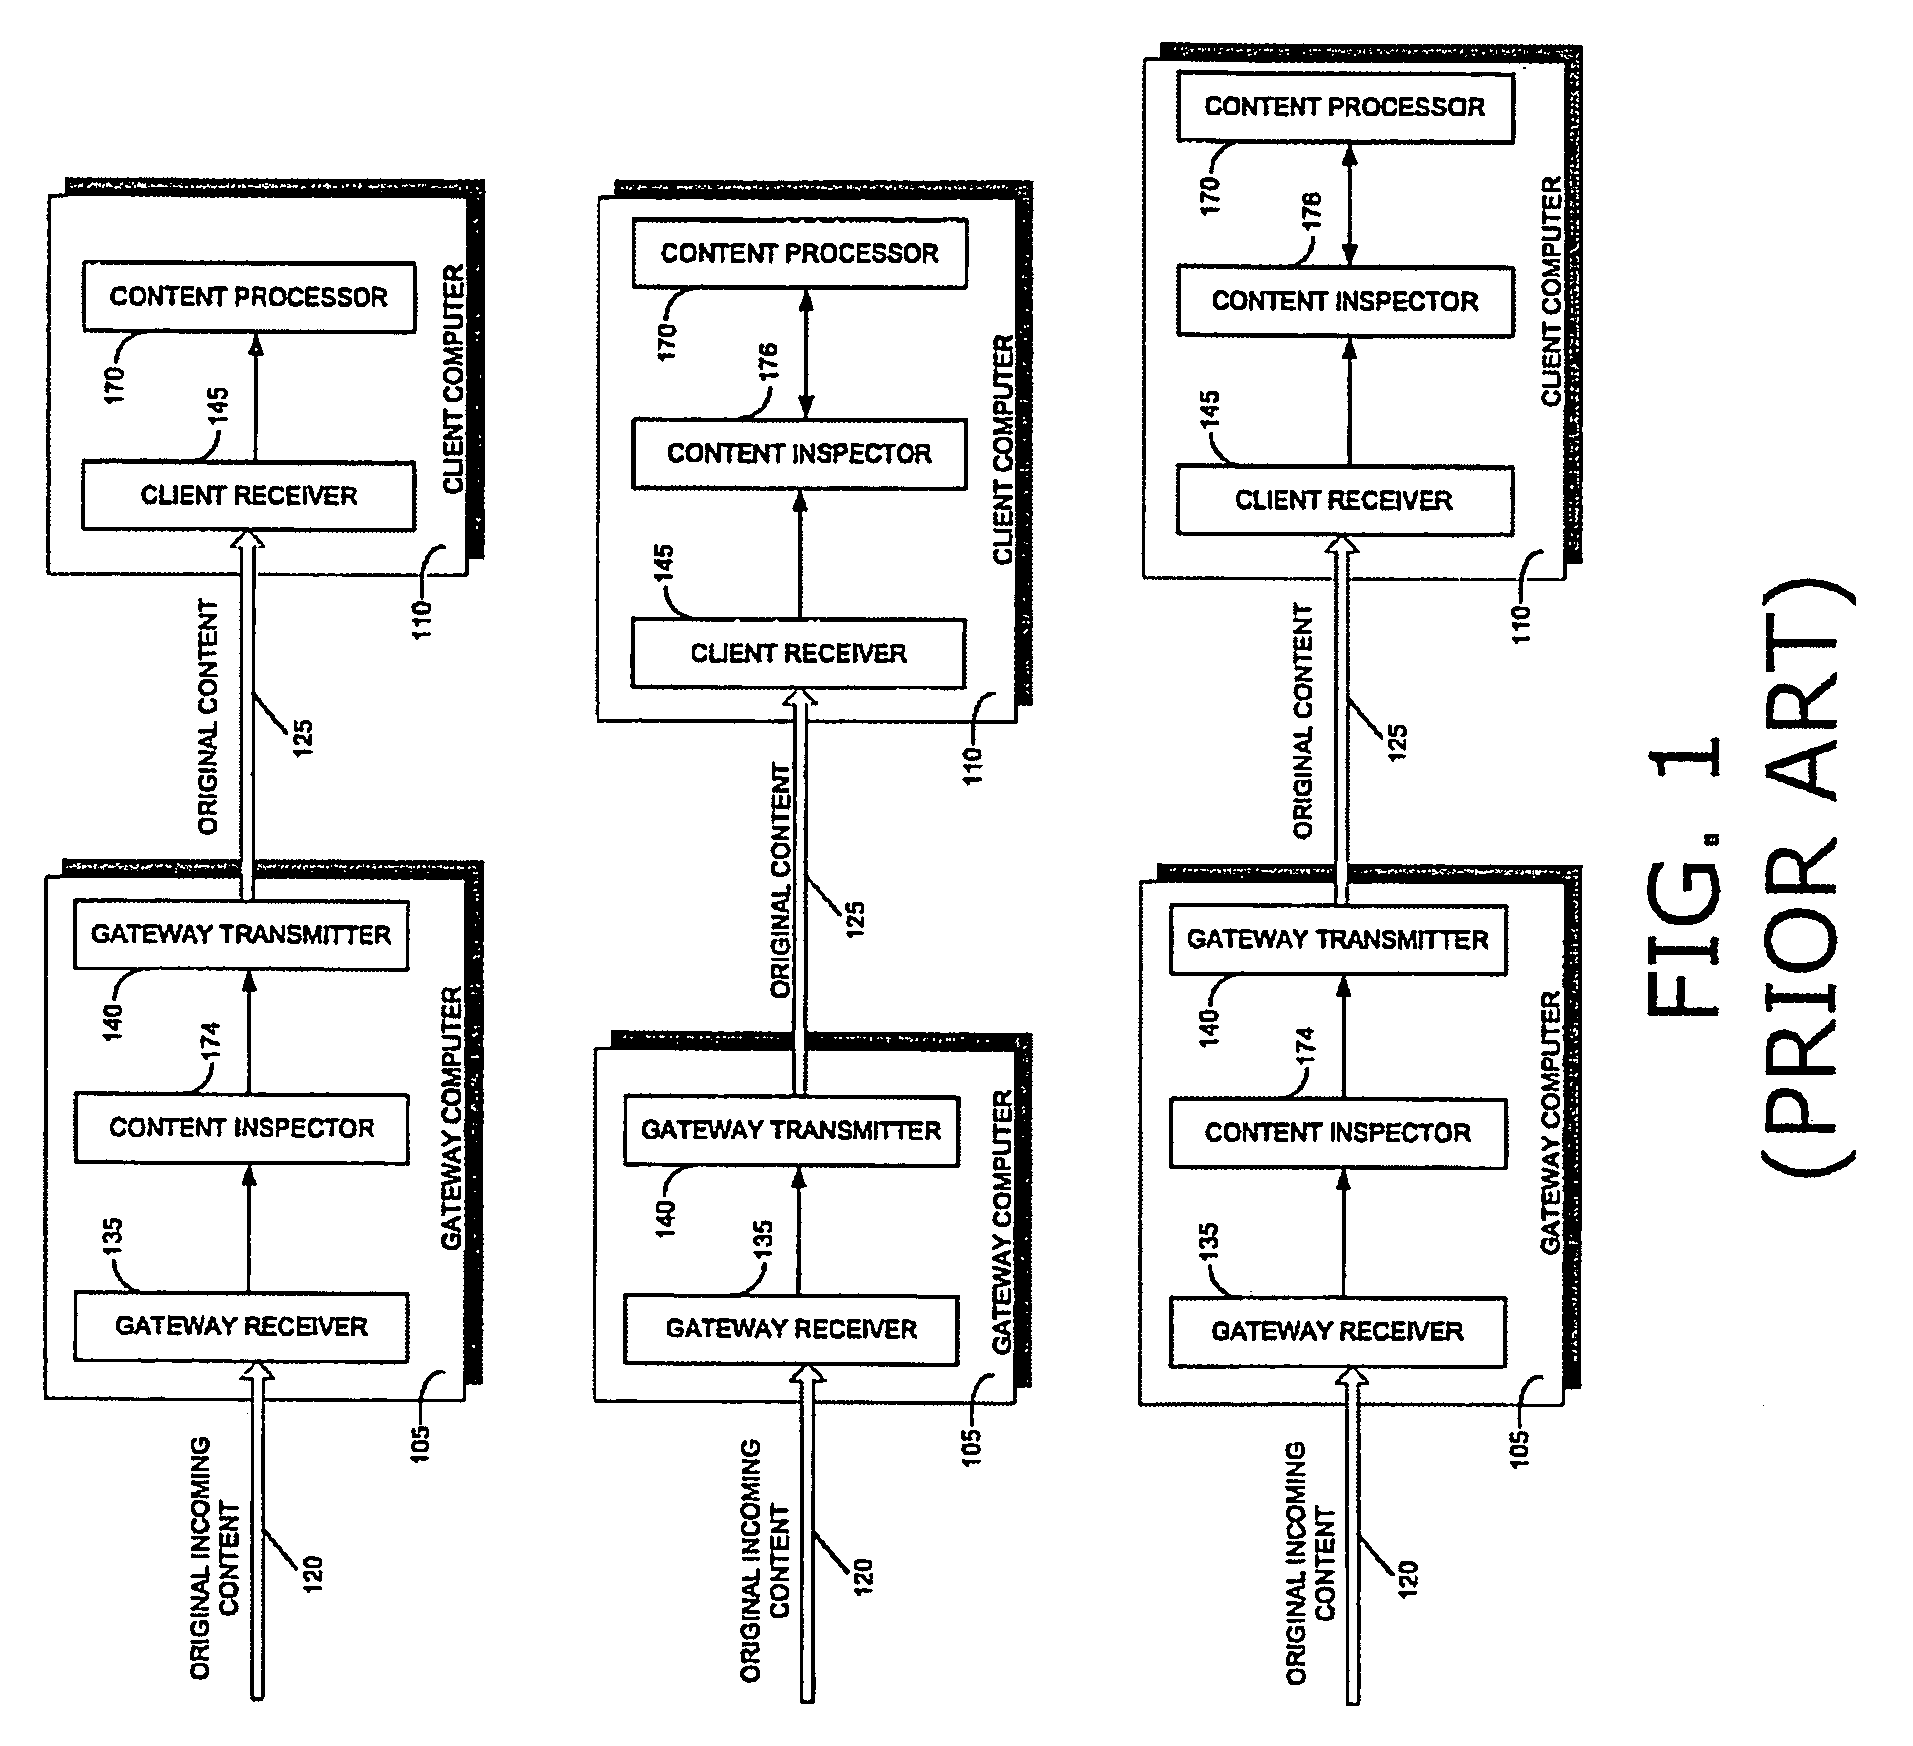 System and method for inspecting dynamically generated executable code